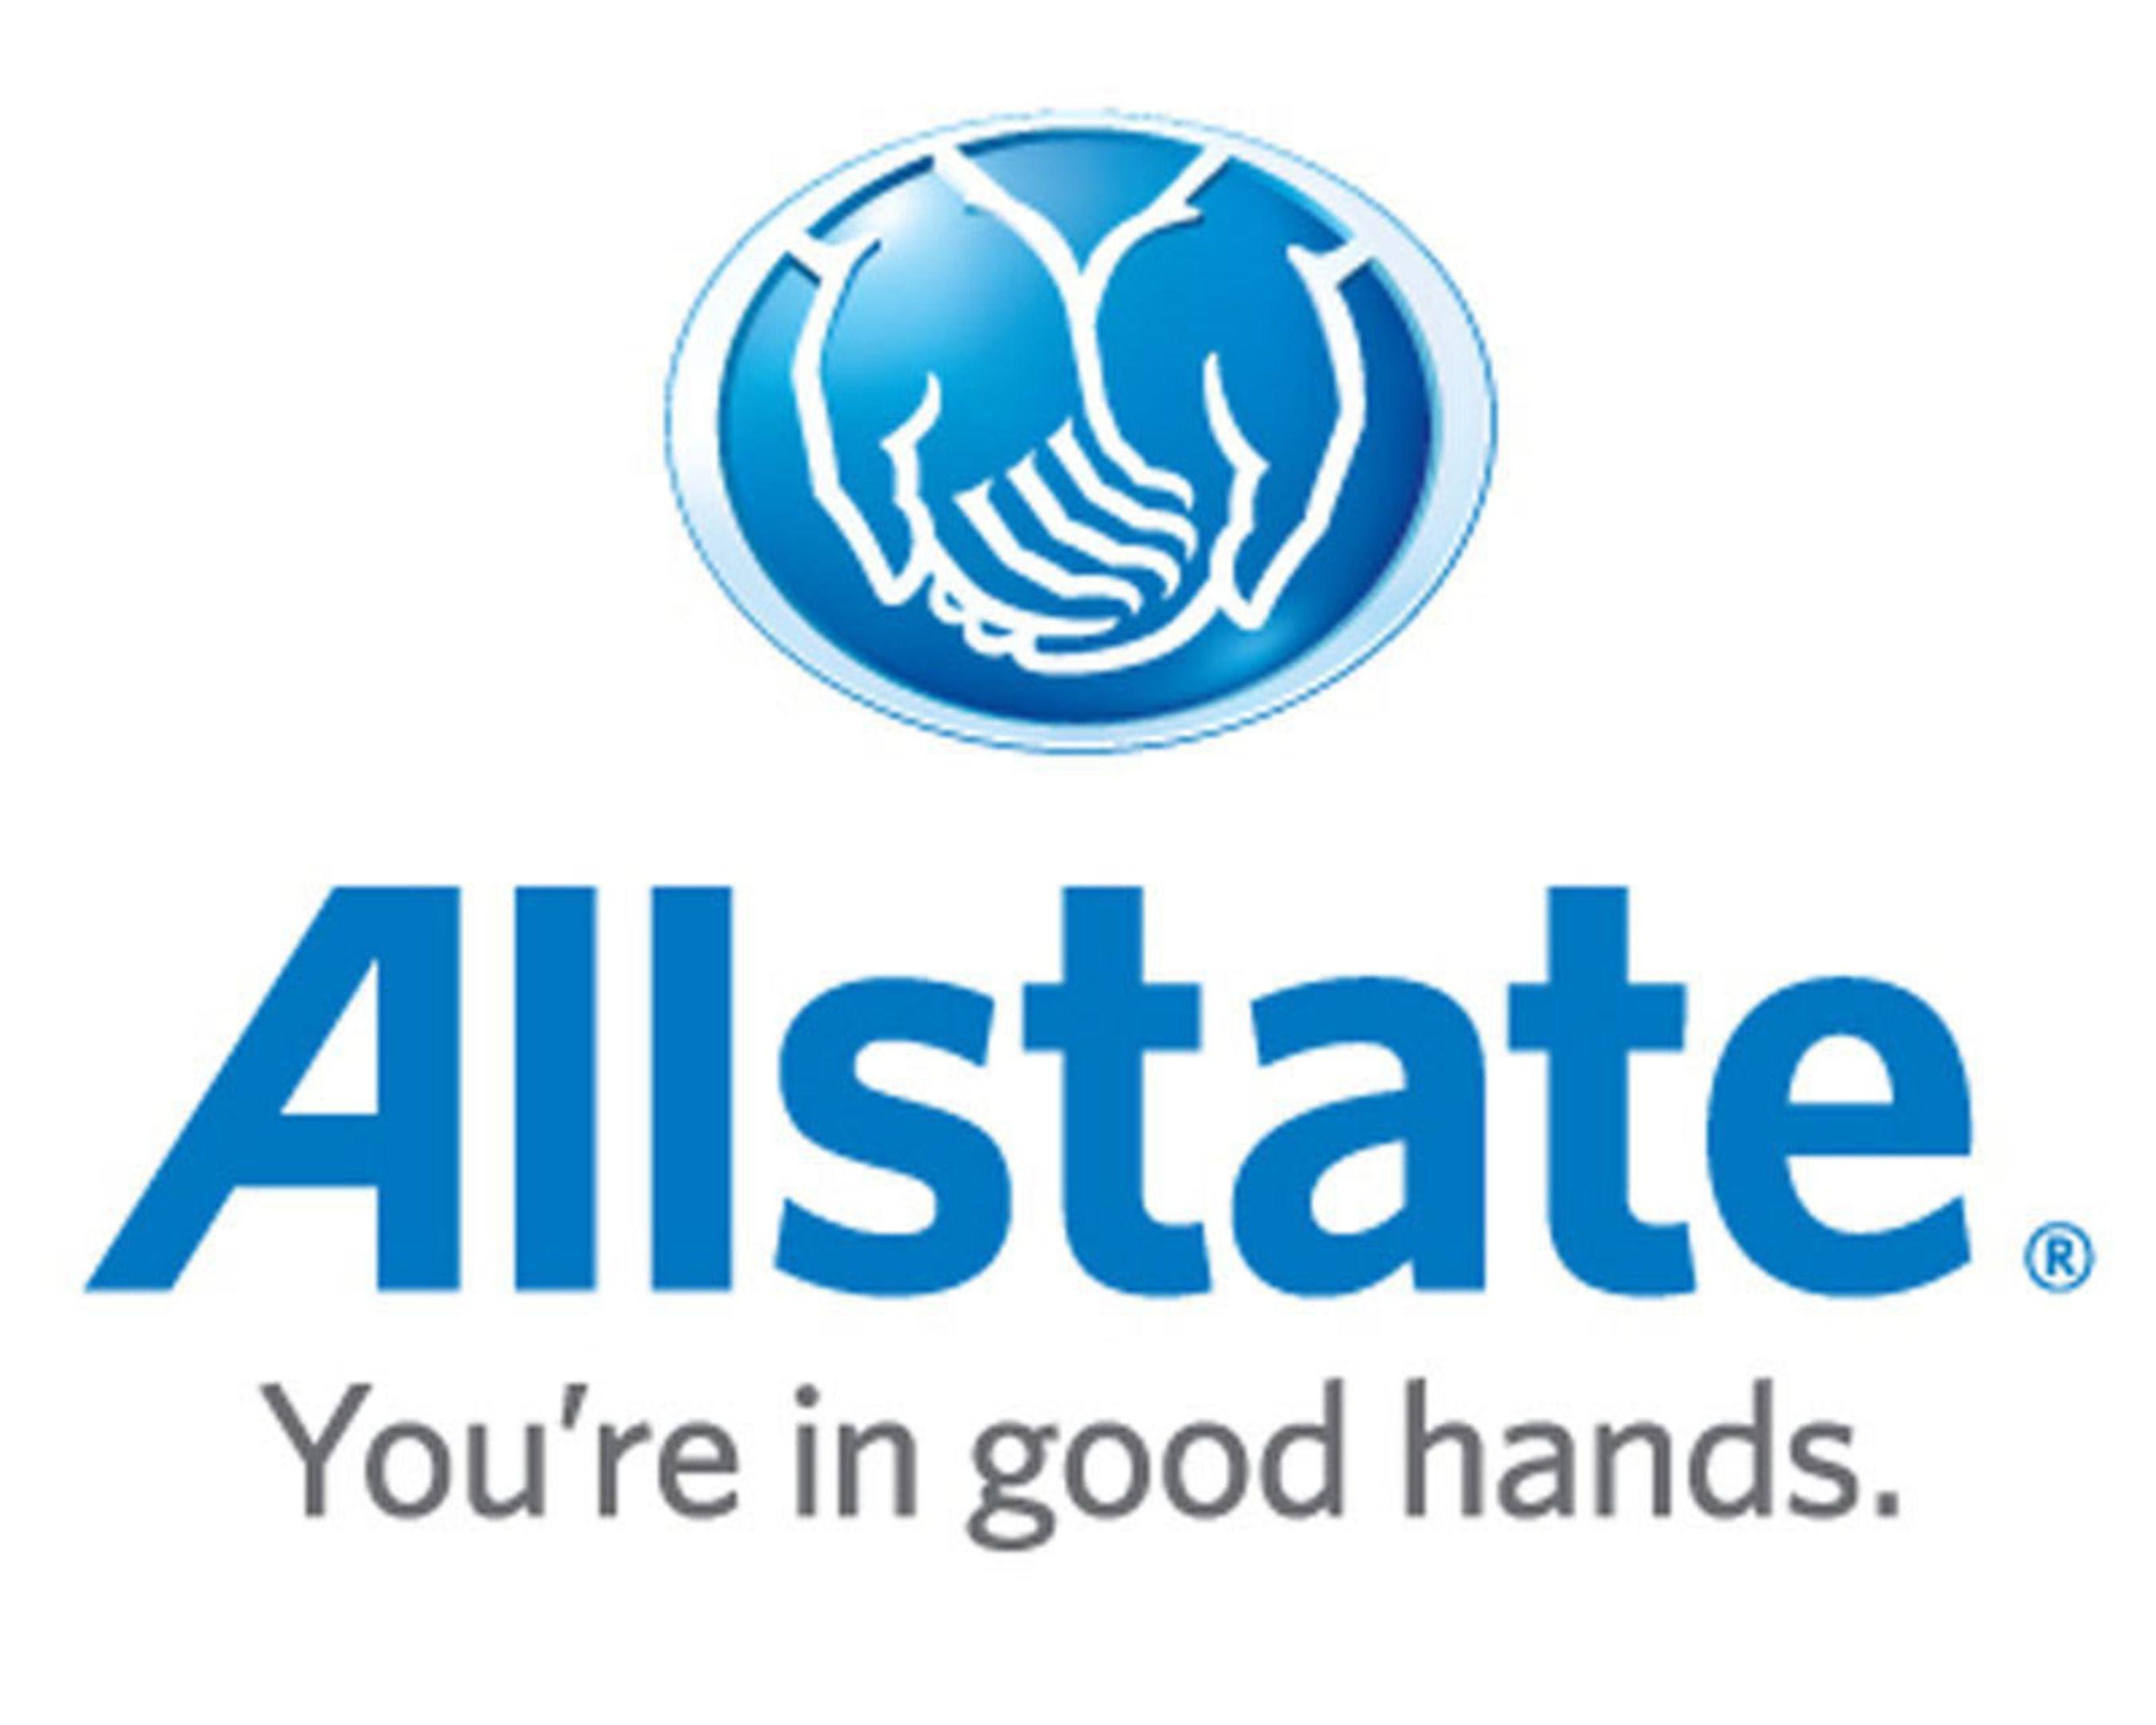 Health Care Insurance Company Logo - Allstate Insurance Company Awarded More Than $6 Million in Judgments ...